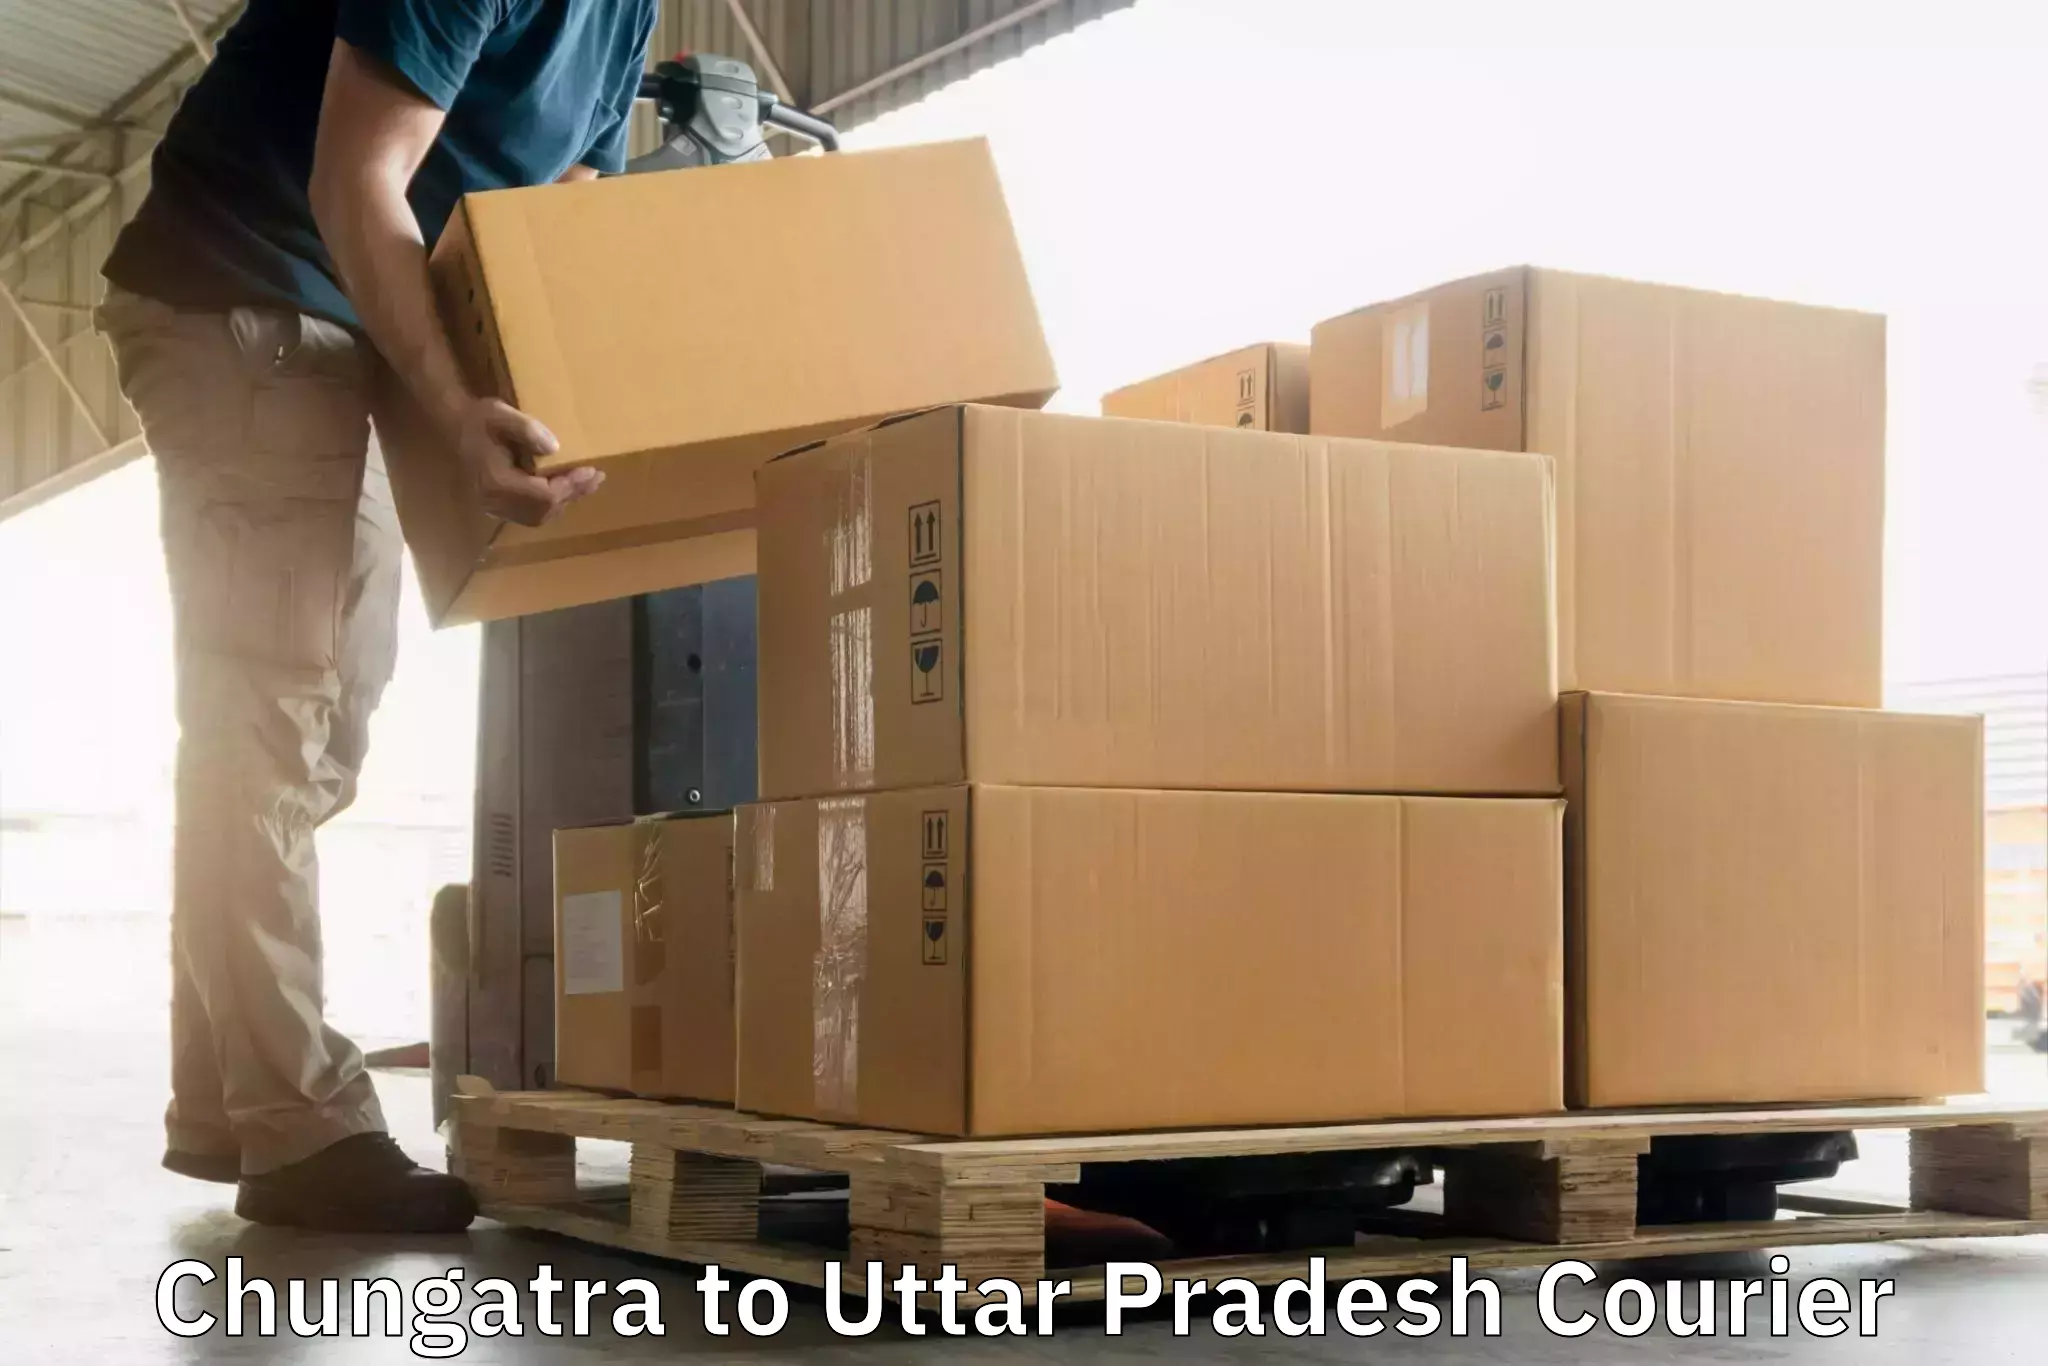 Courier service innovation in Chungatra to Naugarh